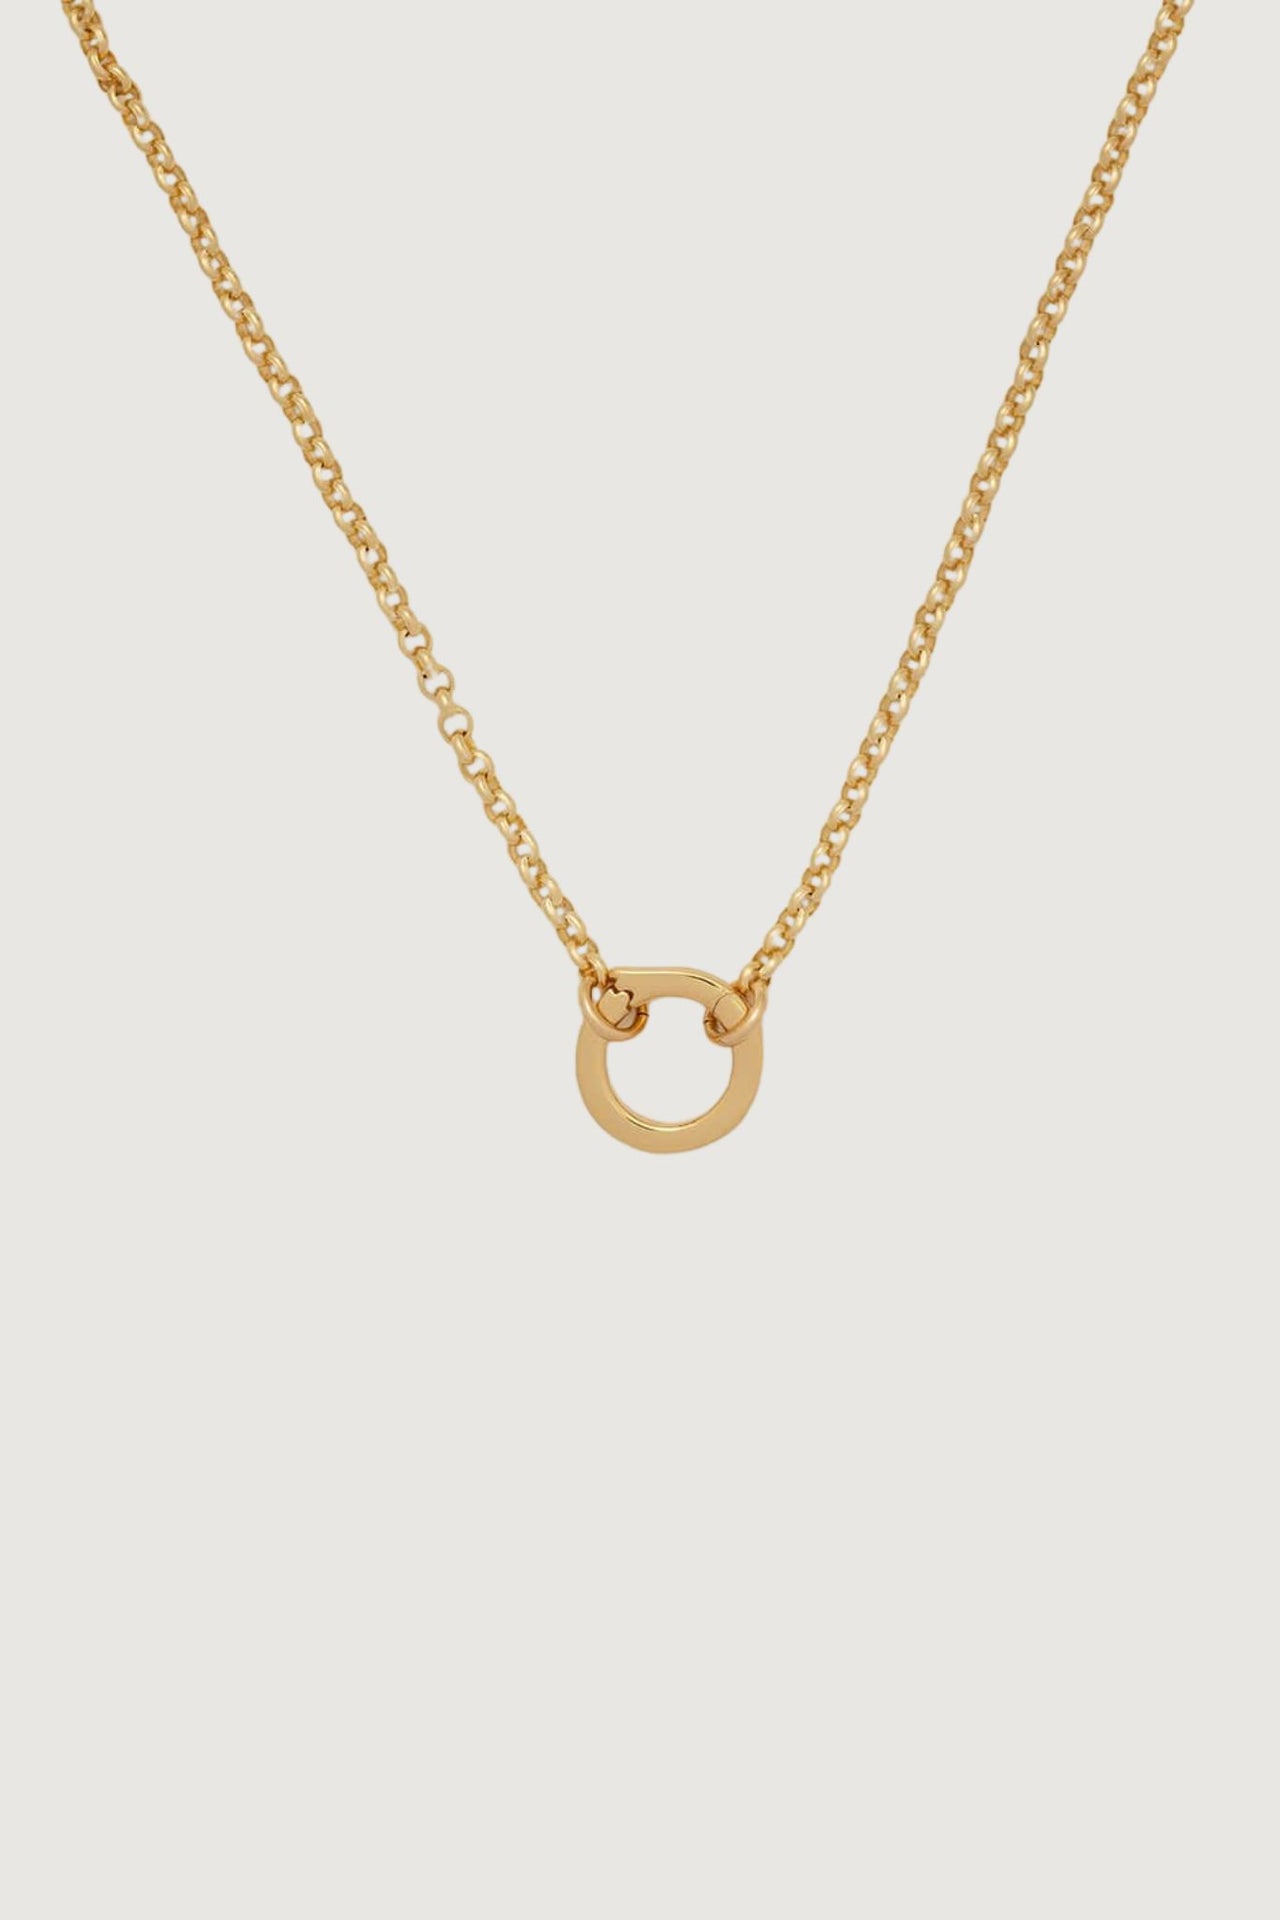 GOLD CHAIN CHARM NECKLACE